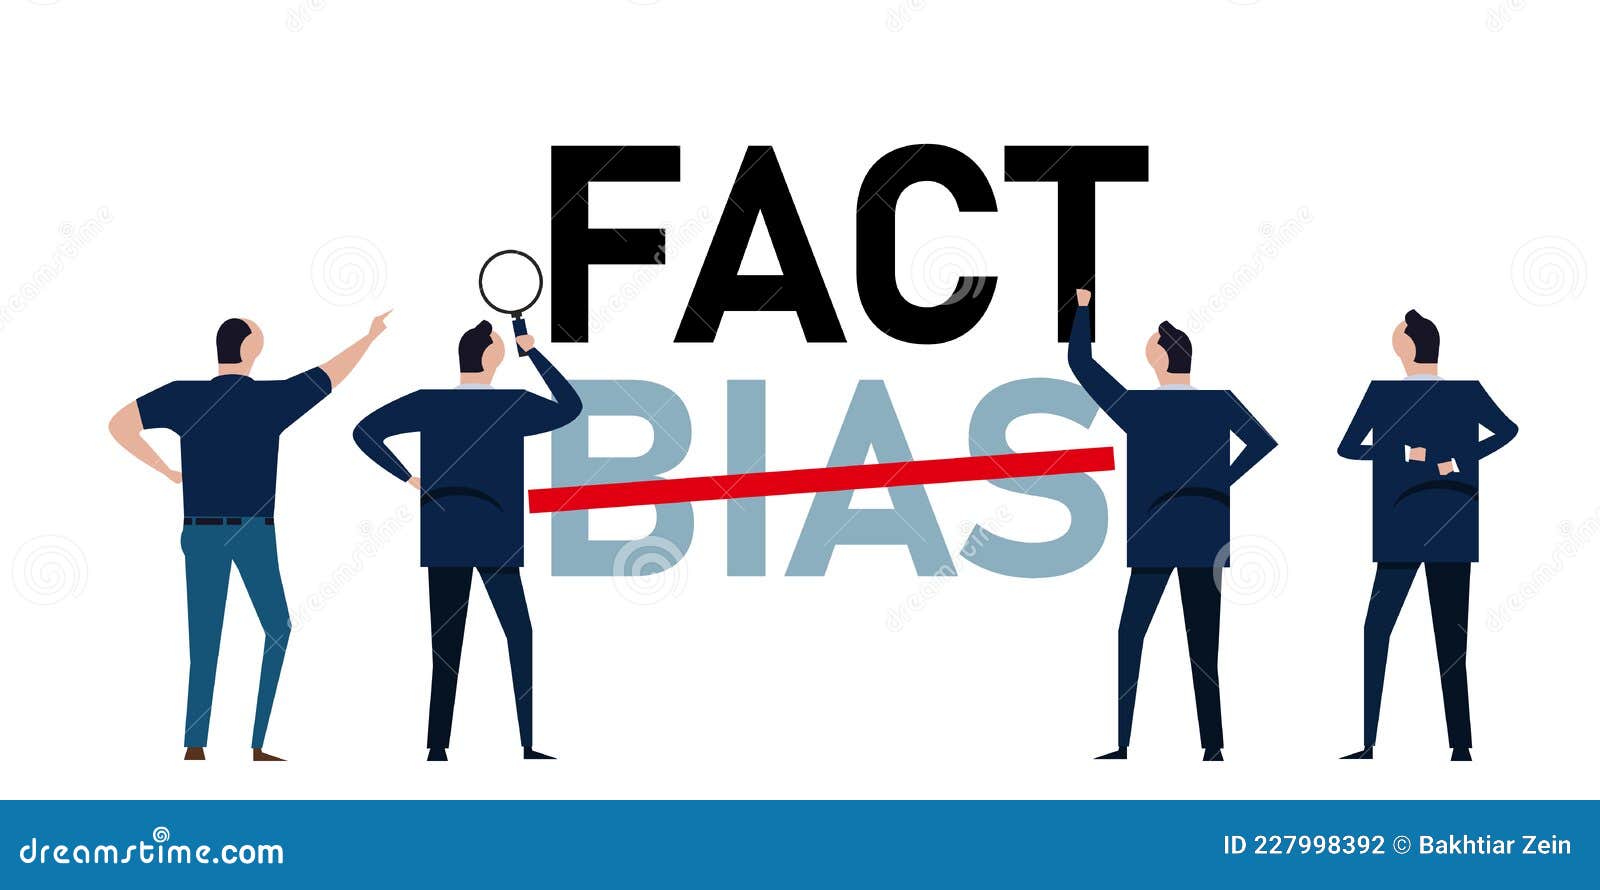 fact and bias false understanding choosing reality from subjective belief